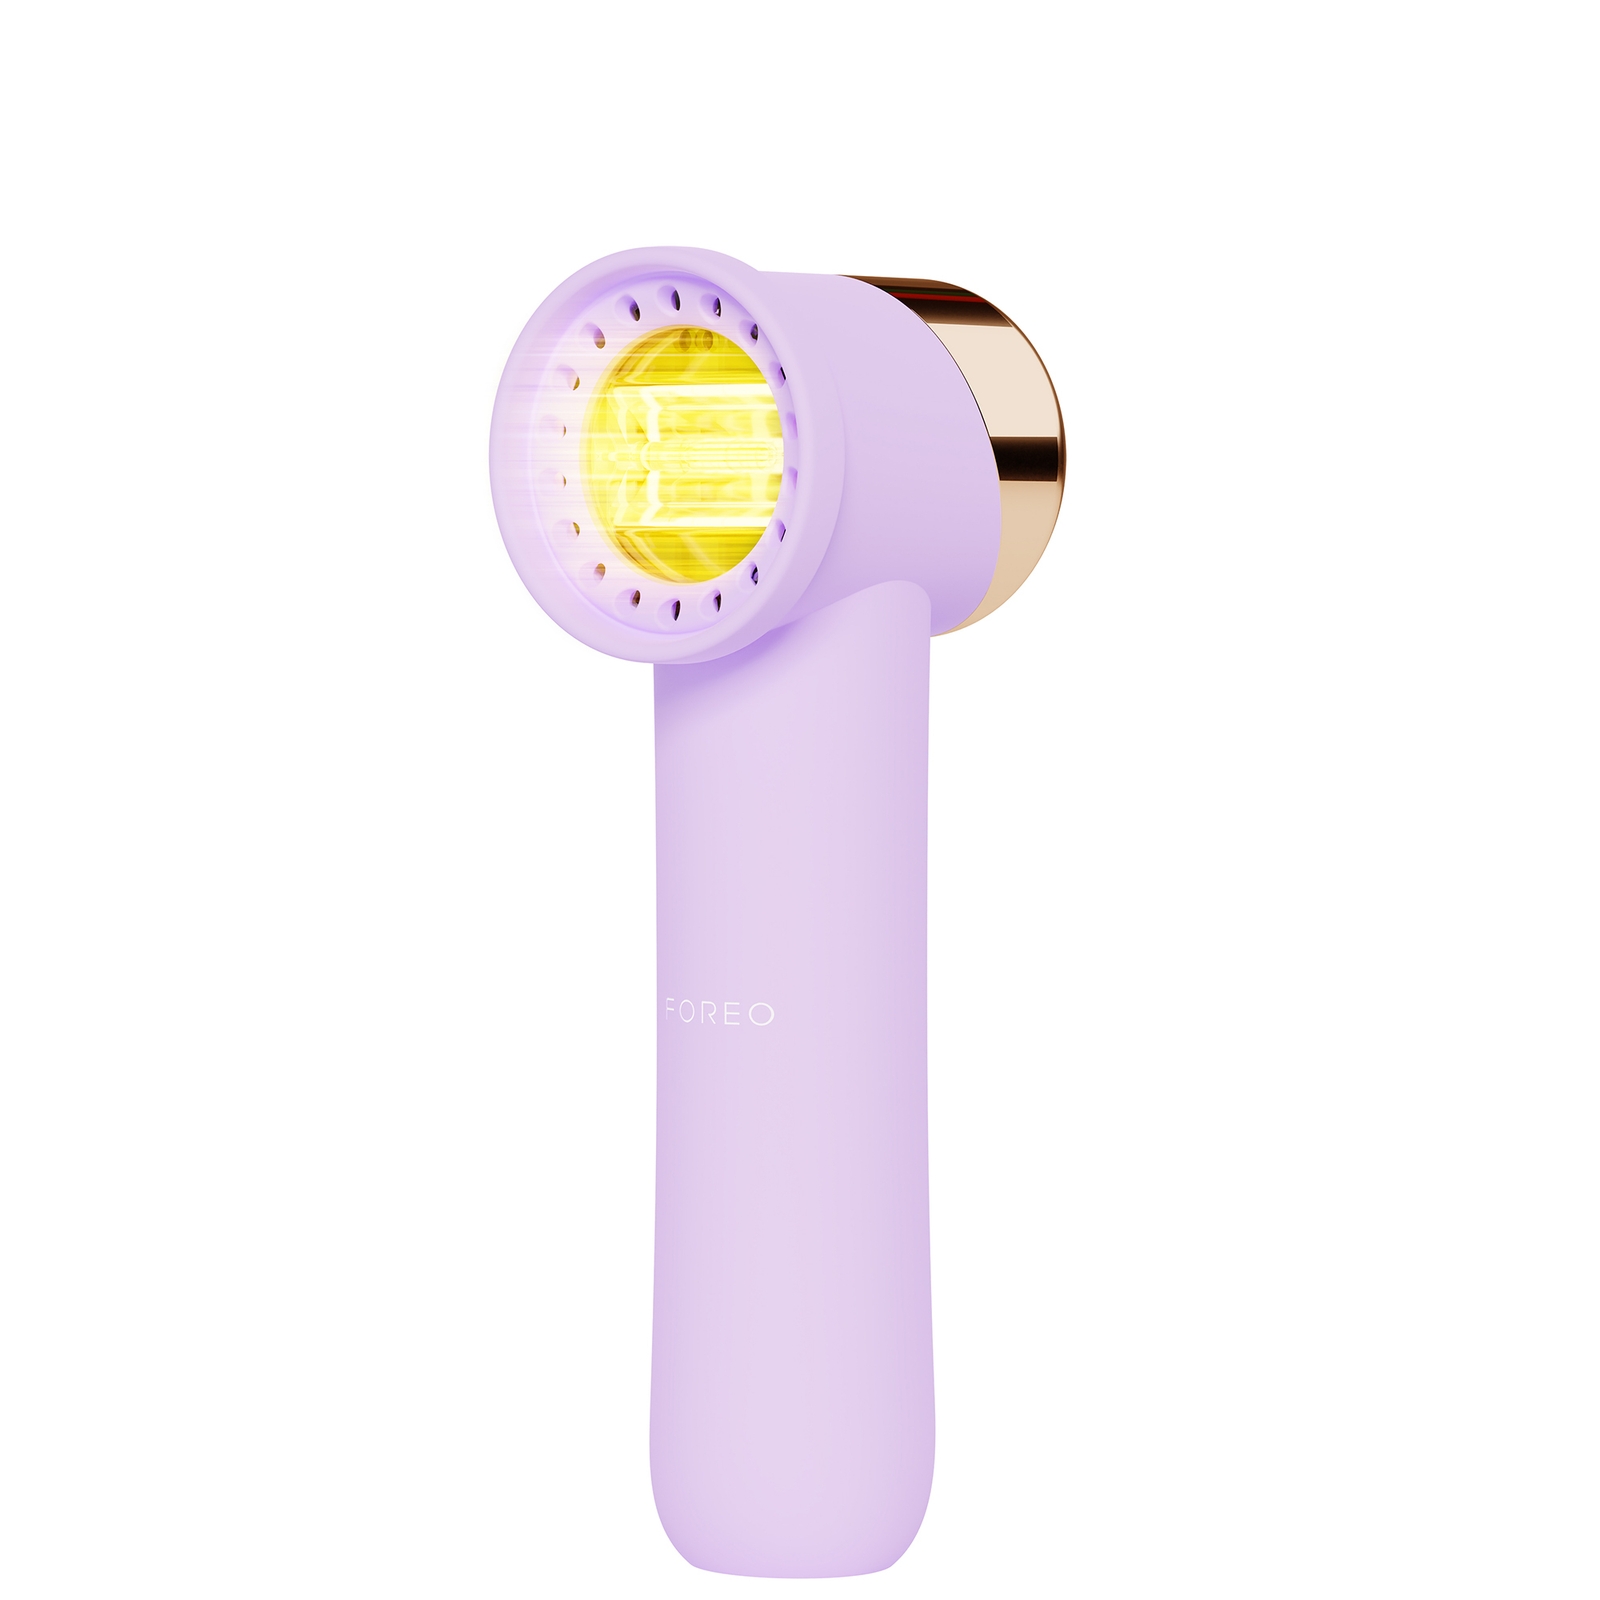 Image of FOREO PEACH 2 Go Device - Lavender